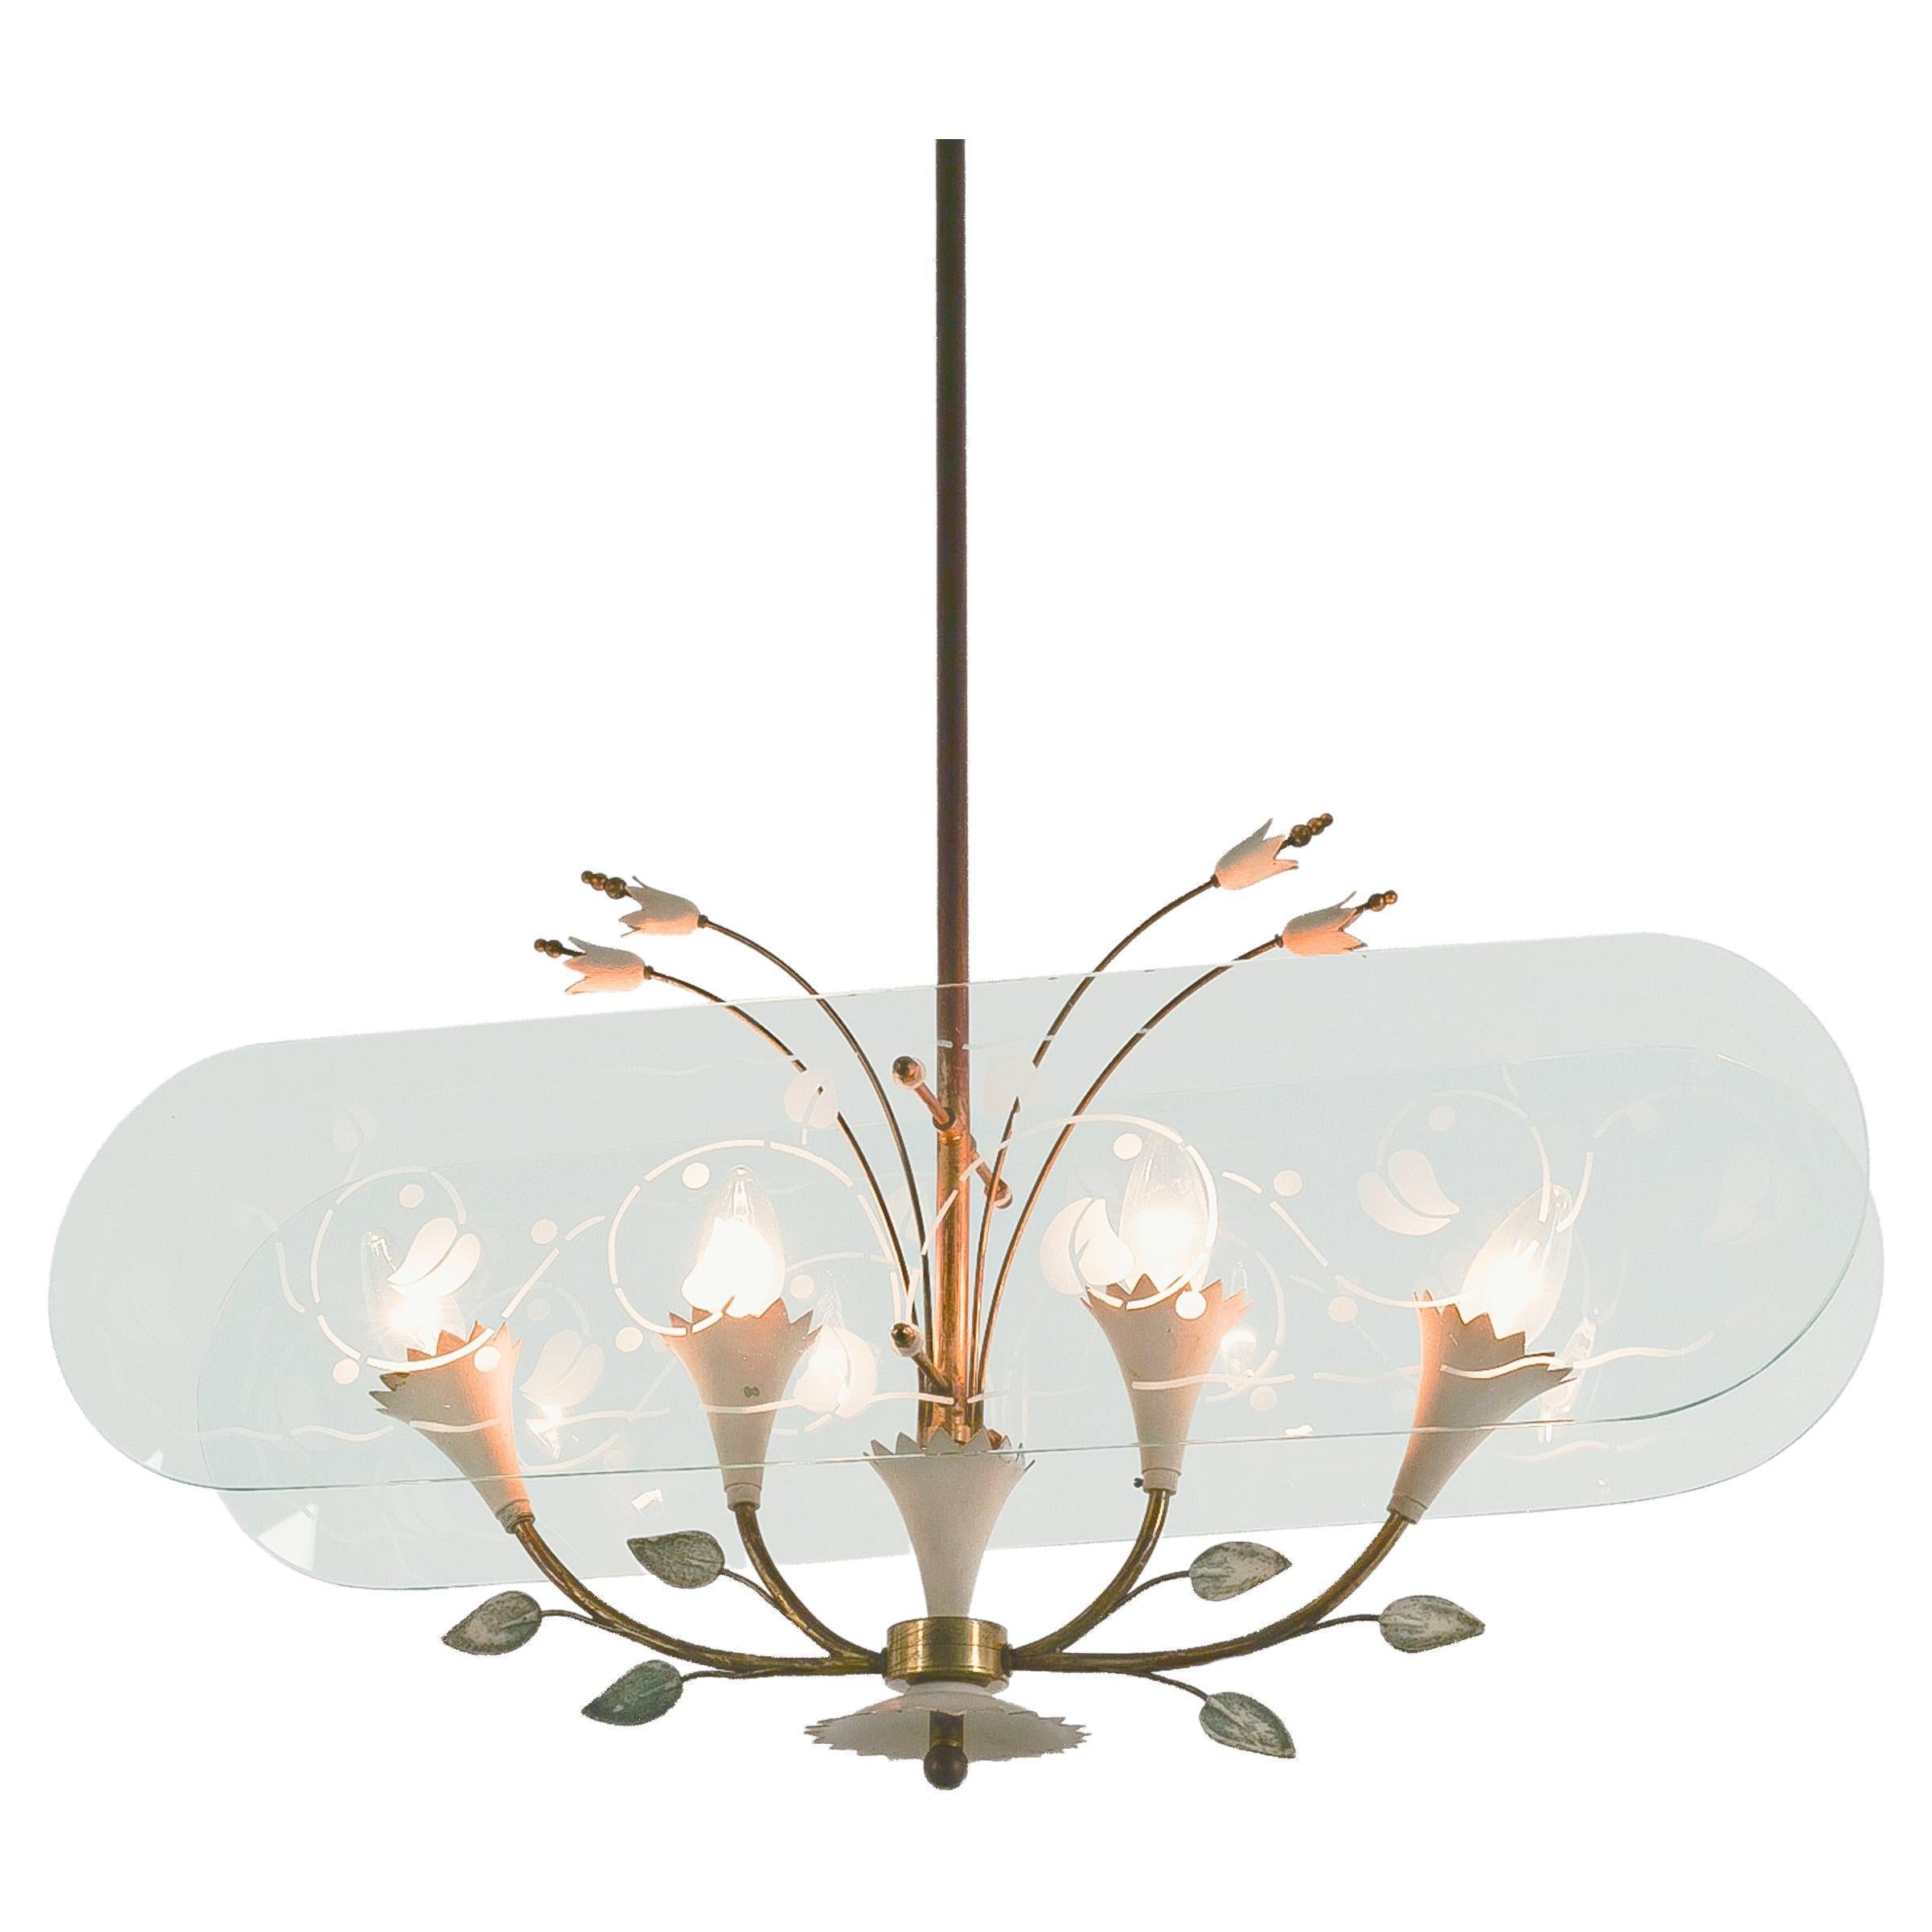 Pietro Chiesa Chandelier Floral Glass with Etched Details Italy, 1950 For Sale